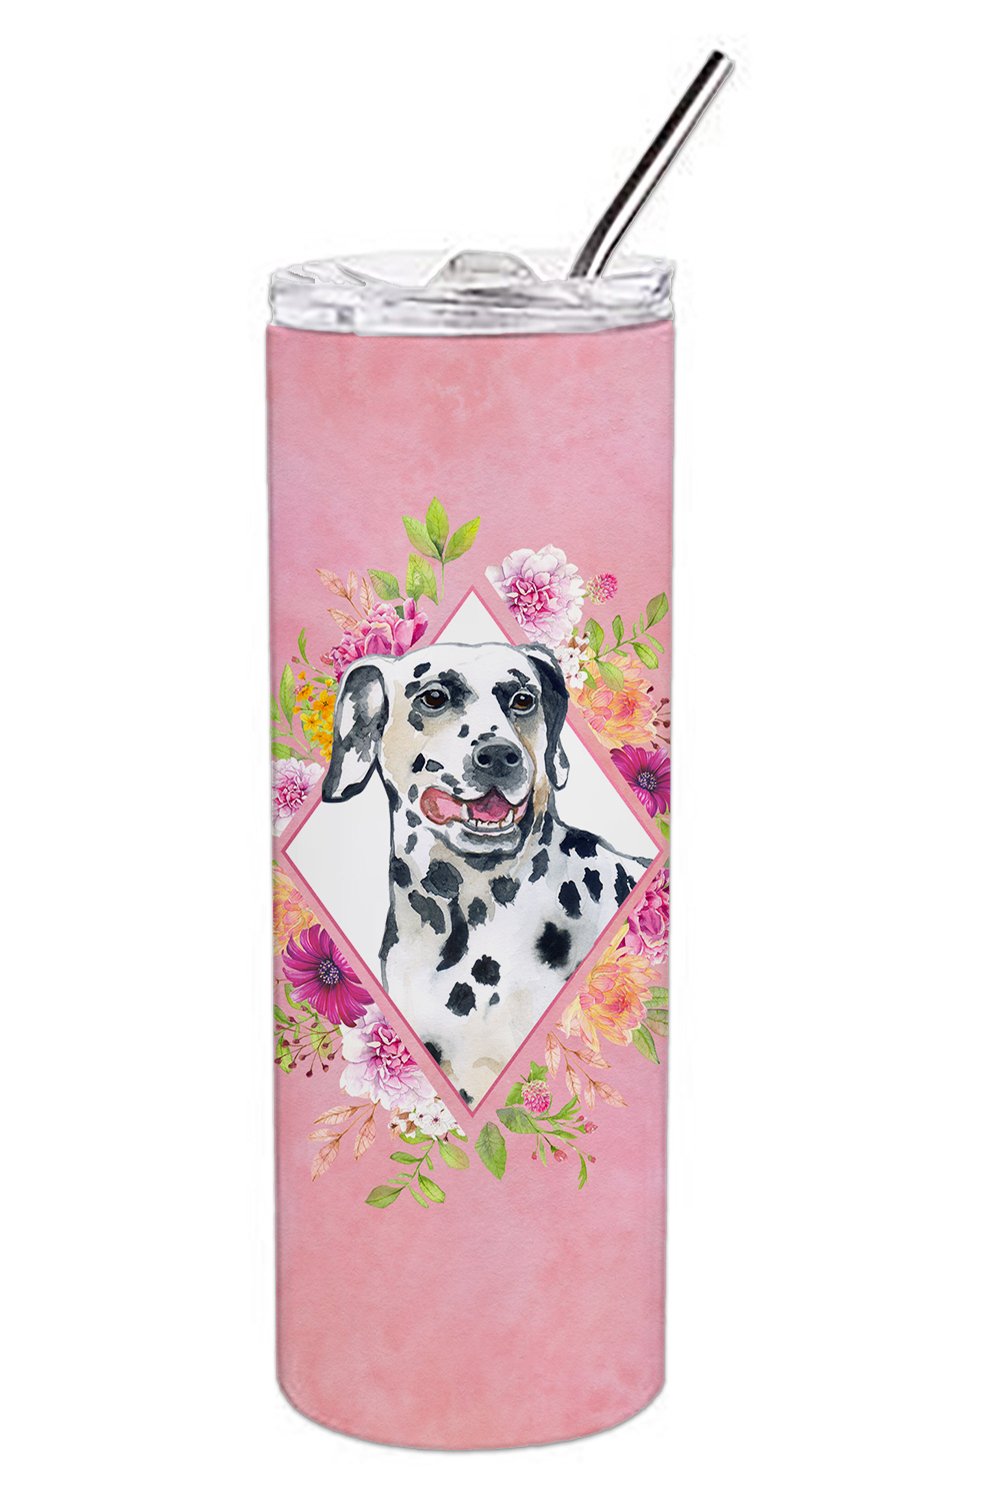 Dalmatian Pink Flowers Double Walled Stainless Steel 20 oz Skinny Tumbler CK4137TBL20 by Caroline's Treasures